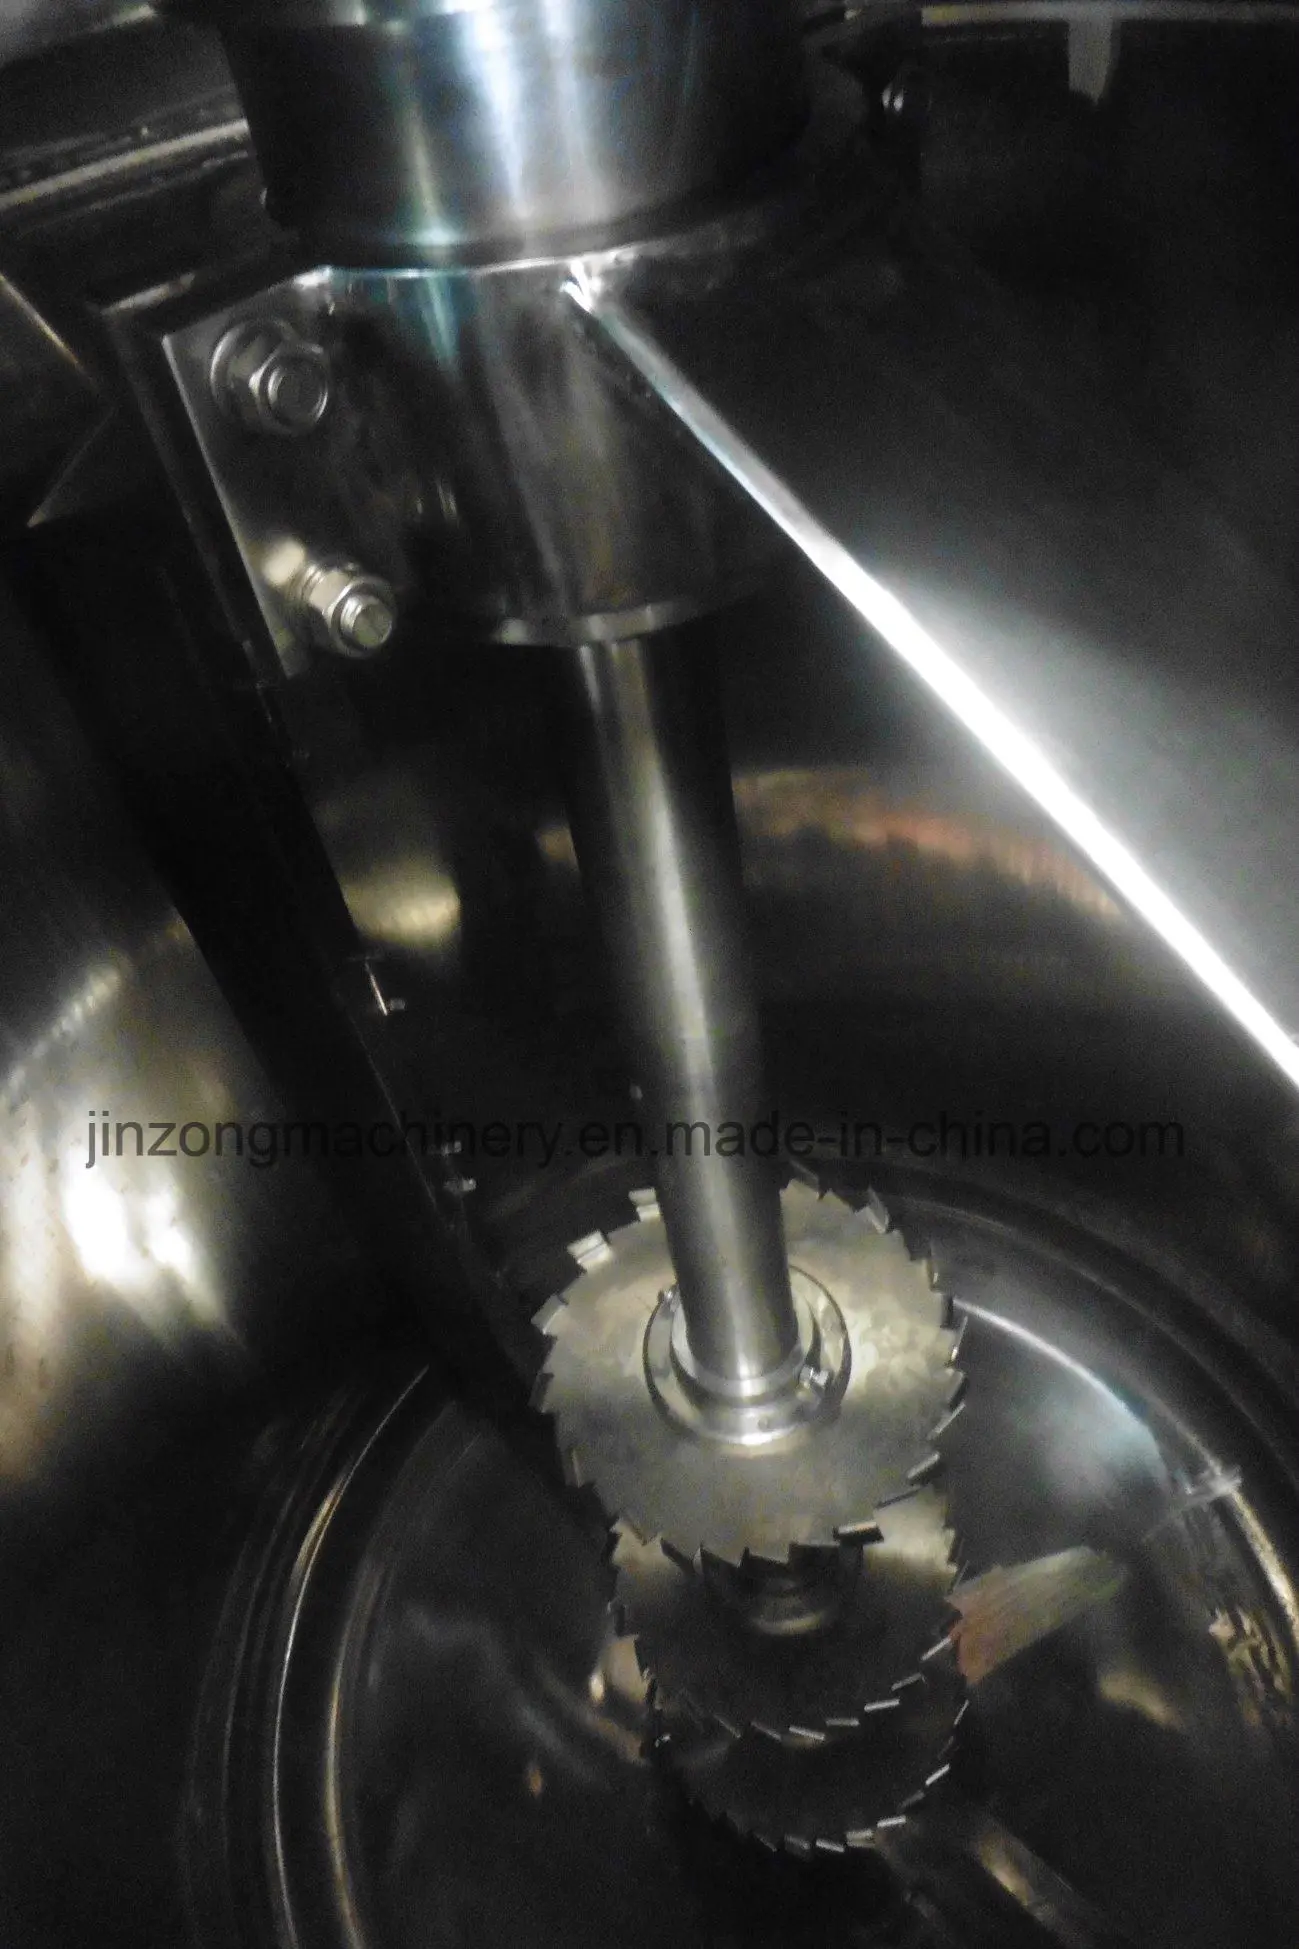 Stainless Steel Mixing Tank with Dispersion Blades